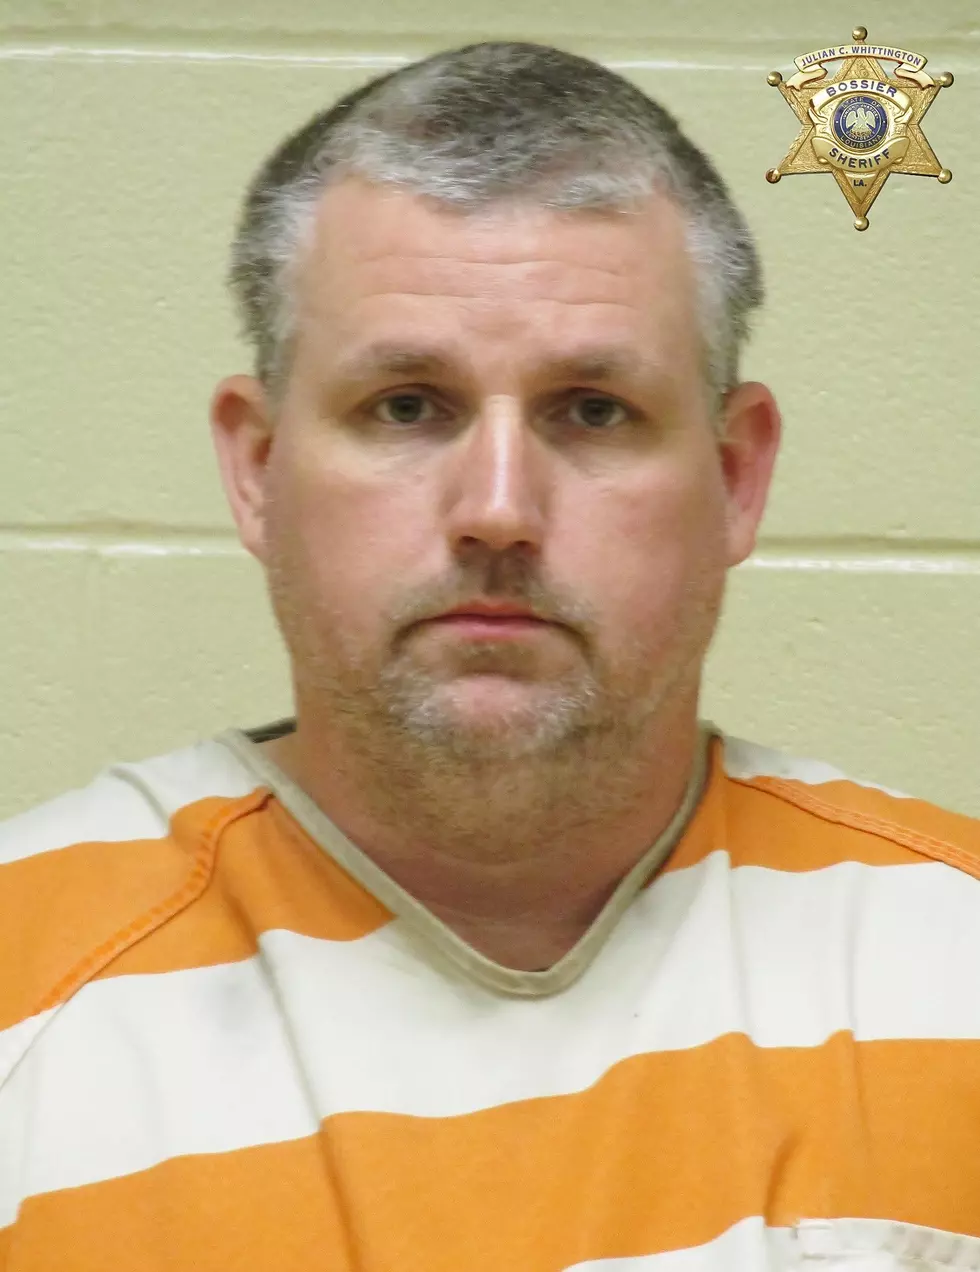 Incarcerated Bossier Teacher Faces New Child Rape Charges